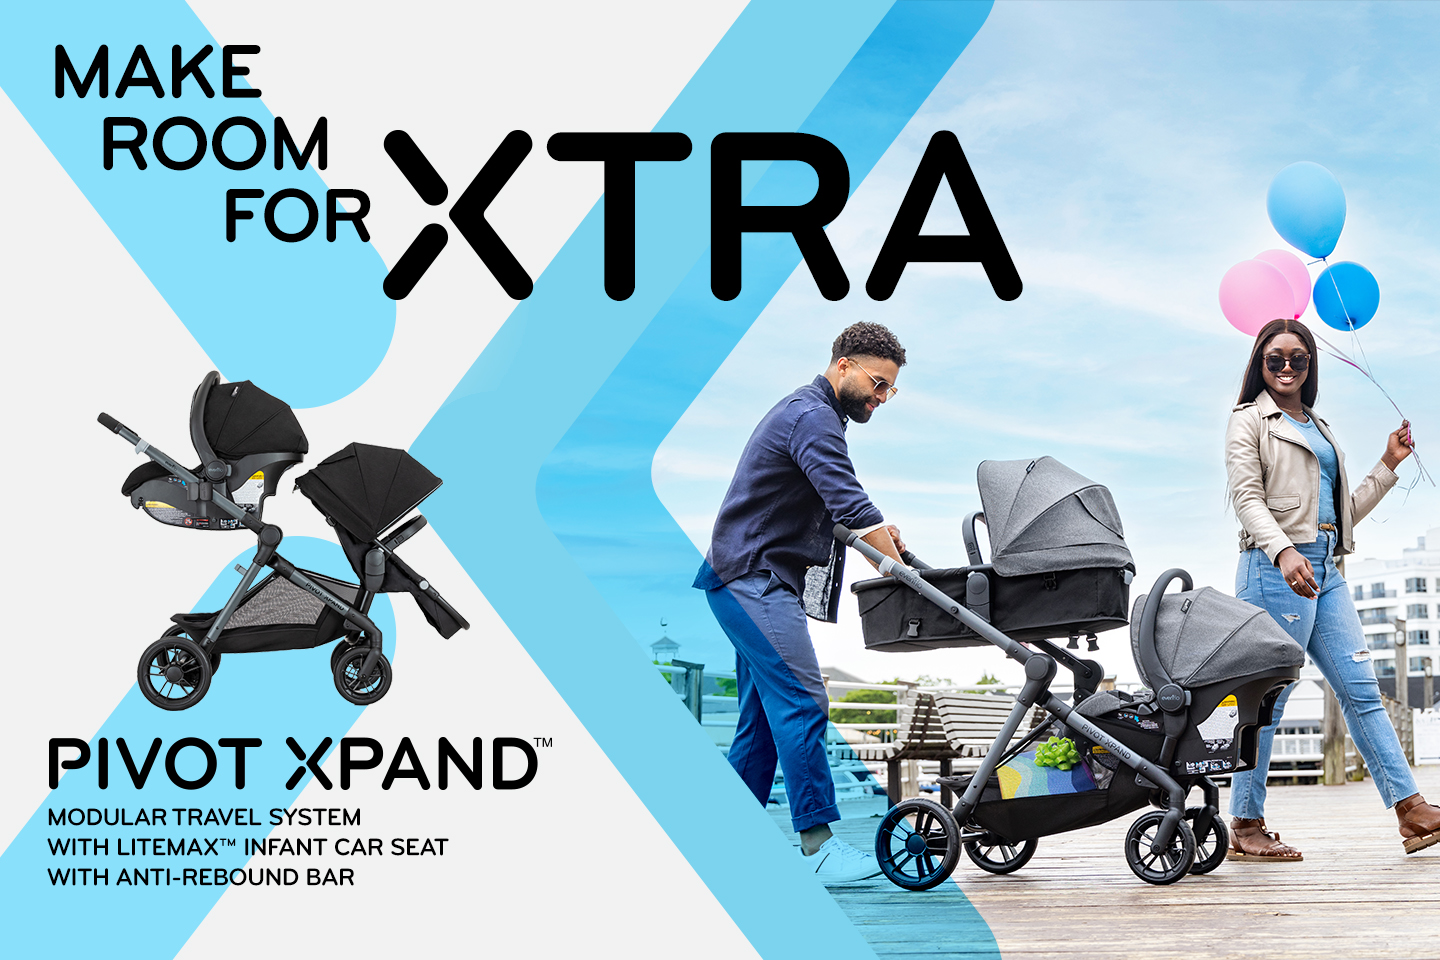 Make room for XTRA. Pivot Xpand Modular Travel System with LiteMax Infant Car Seat with Anti-Rebound Bar. Image of dad holding Pivot Xpand with mom walking aside holding balloons.